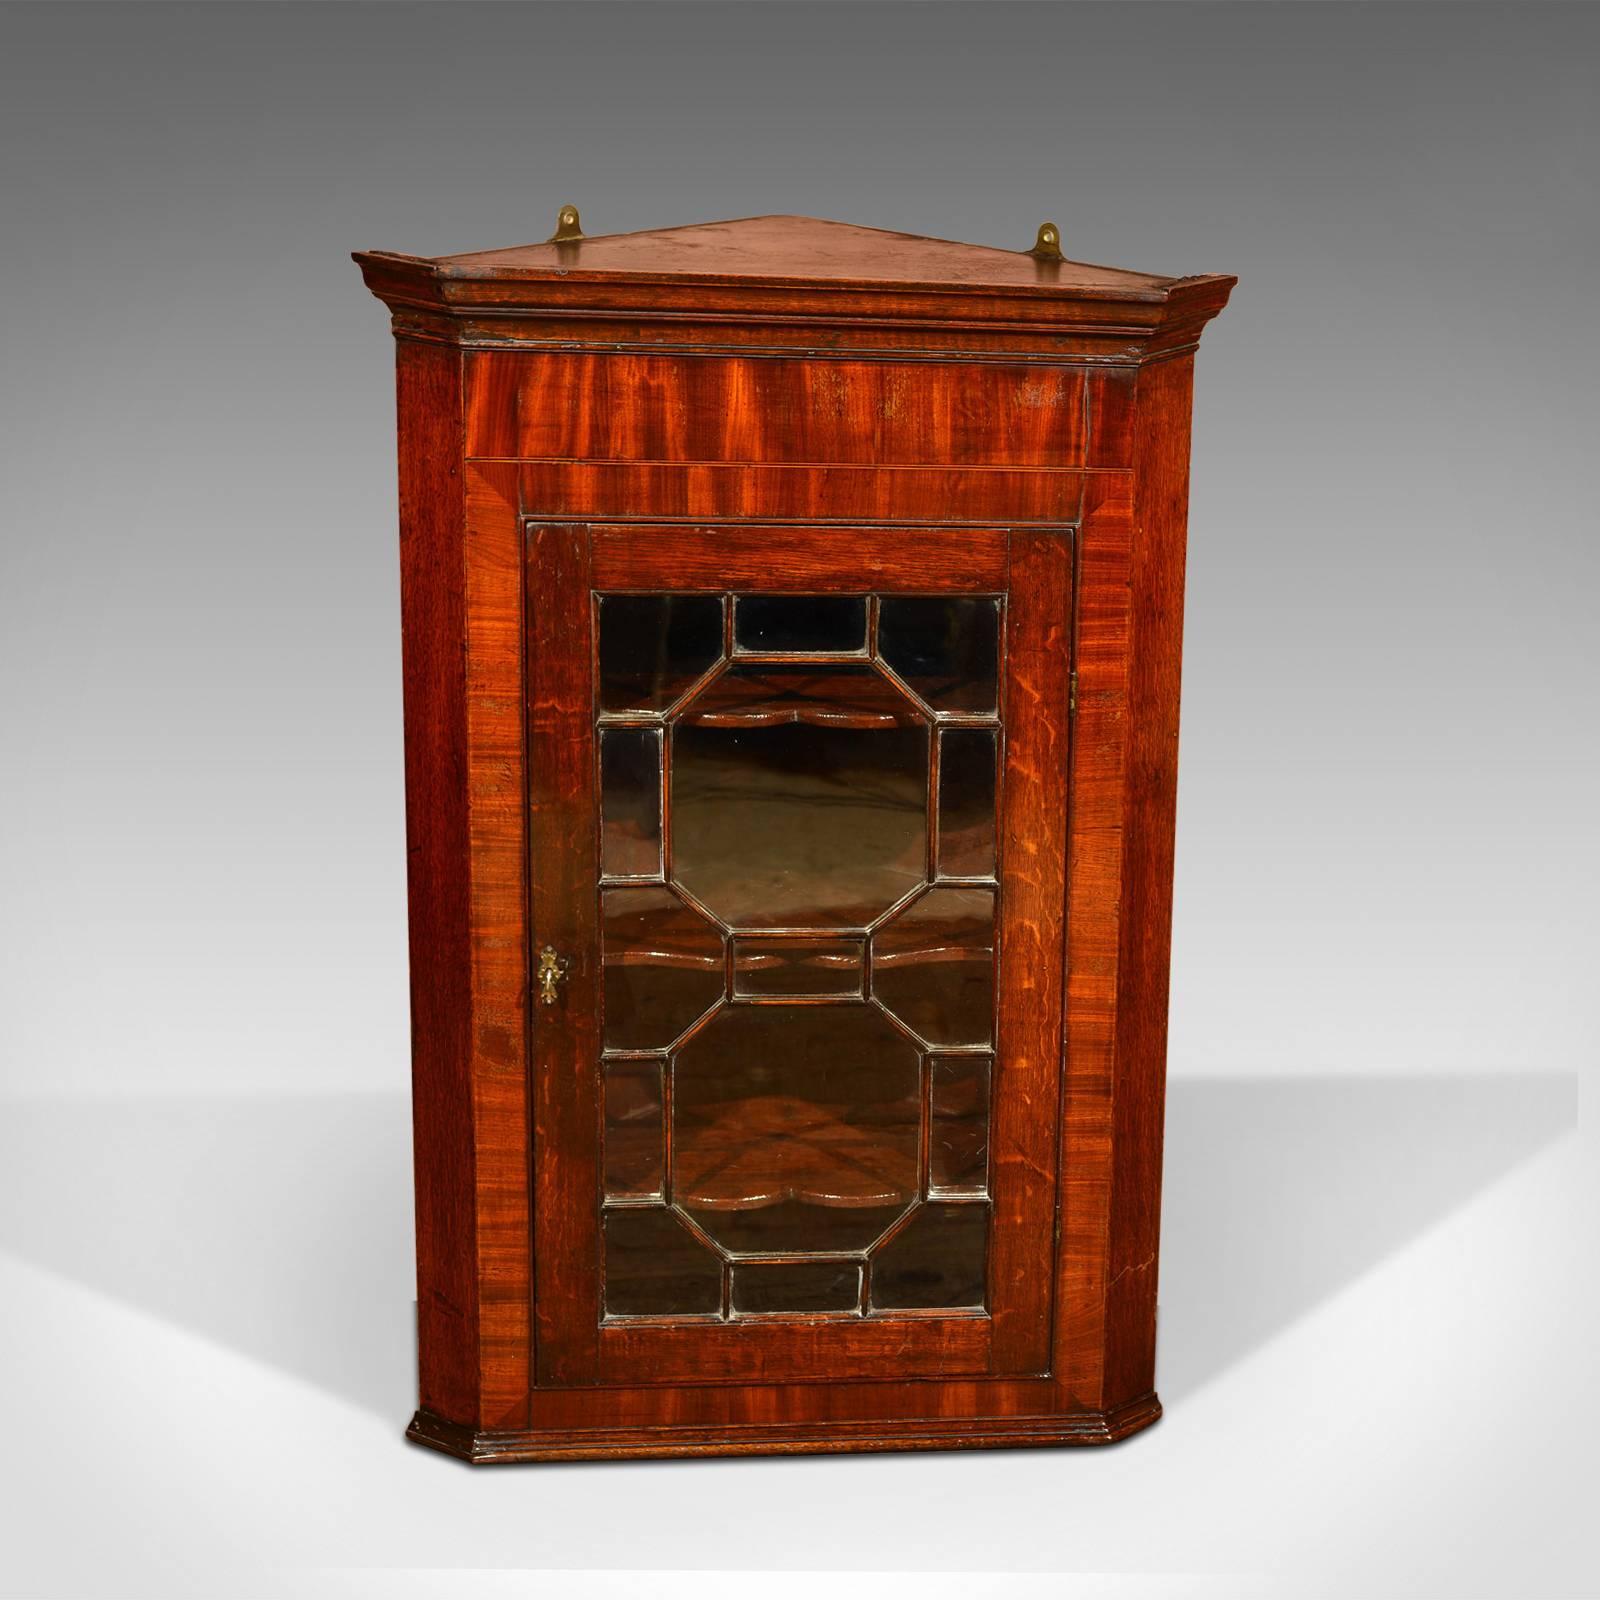 This is an antique, Georgian, hanging antique corner cabinet dating to circa 1800.

This mid-sized cabinet is constructed in oak with canted corners and offers added interest with the mahogany veneer framing around the door panel. The fifteen pane